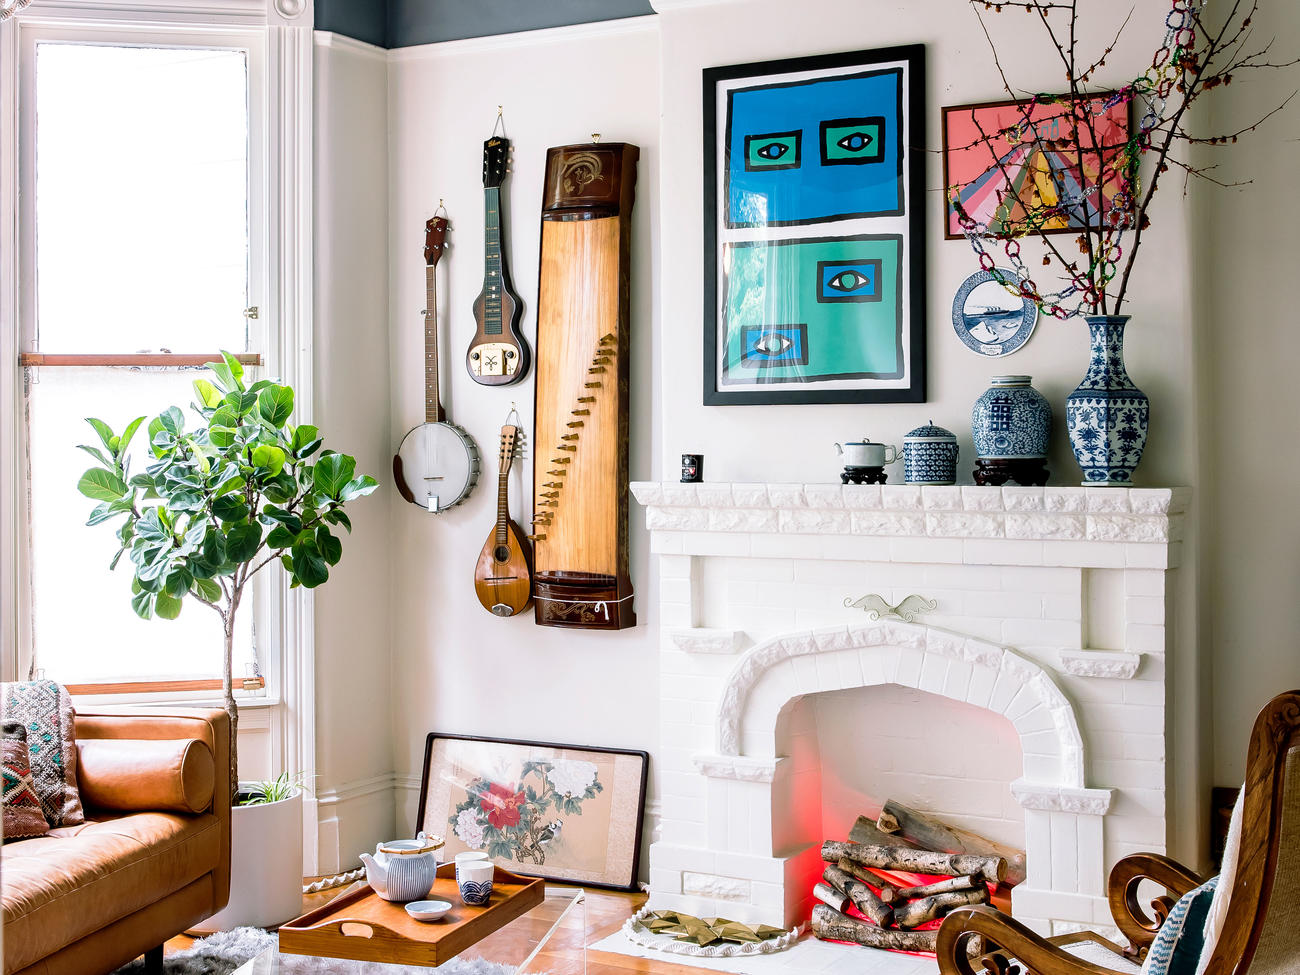 How to Make Art the Star in Your Home Decor